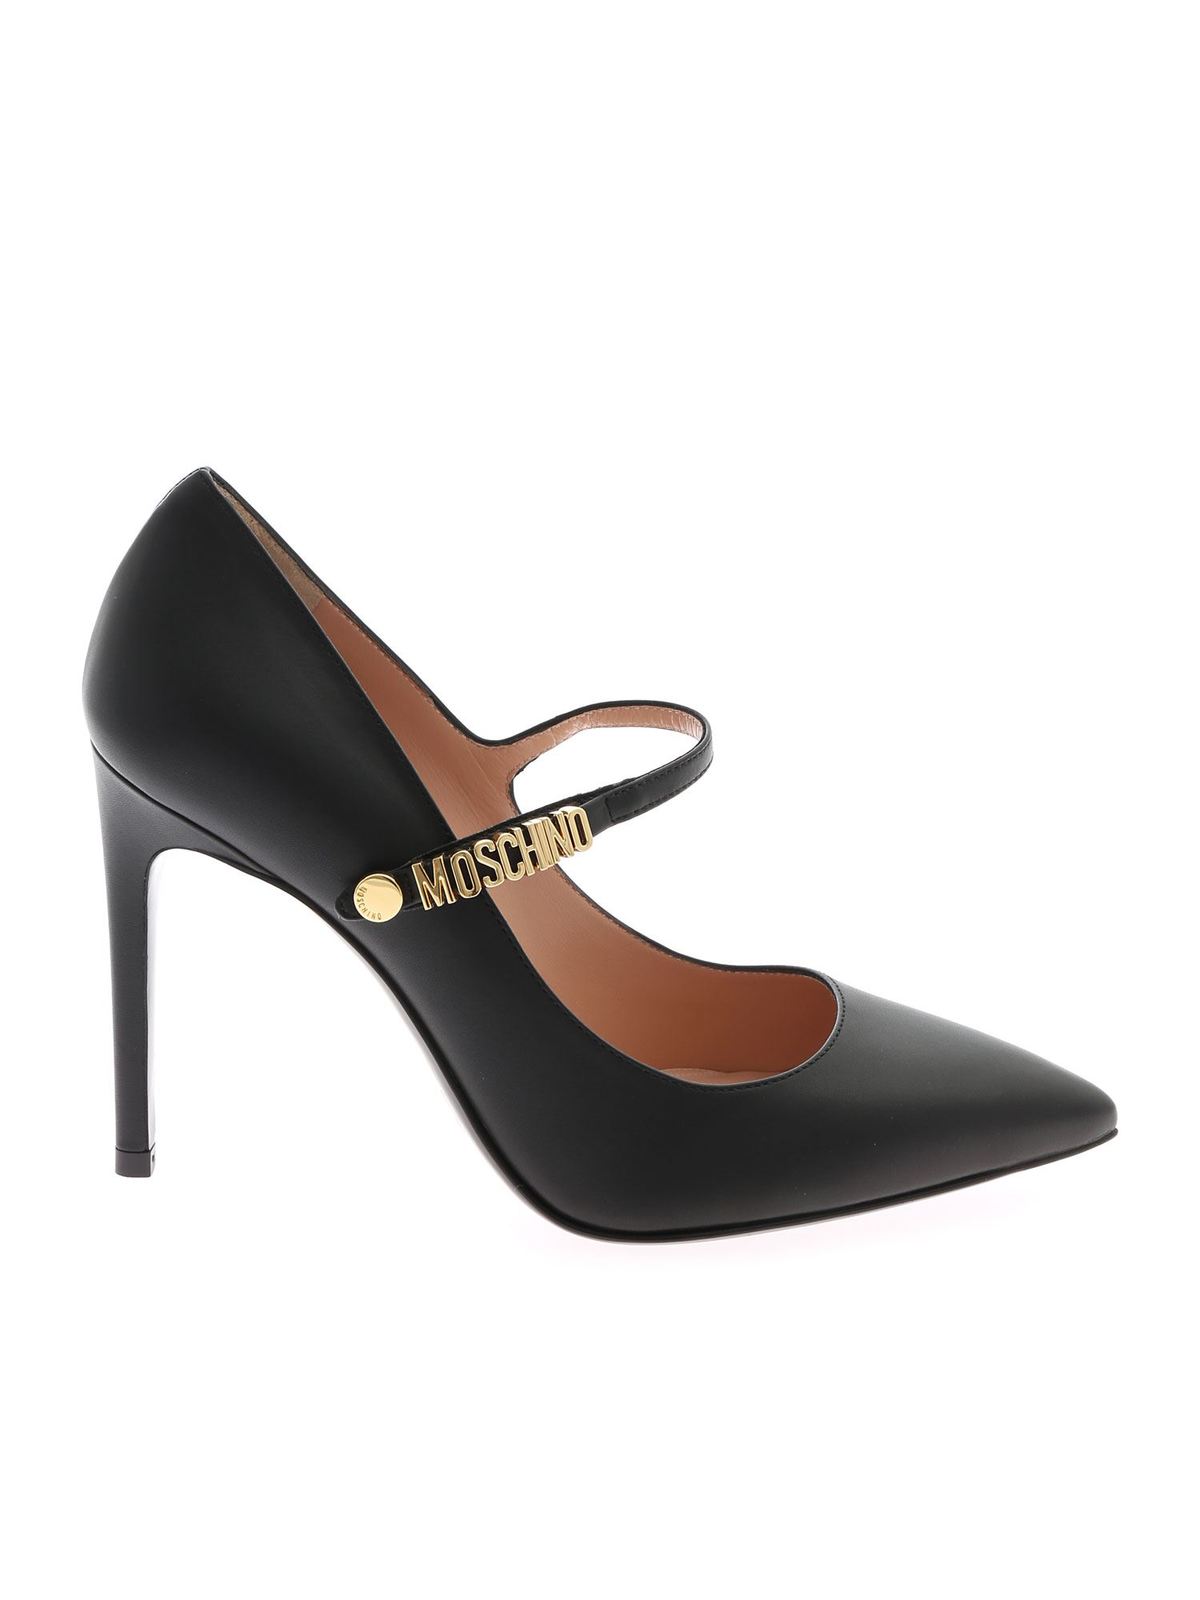 MOSCHINO GOLD LOGO LEATHER PUMPS IN BLACK